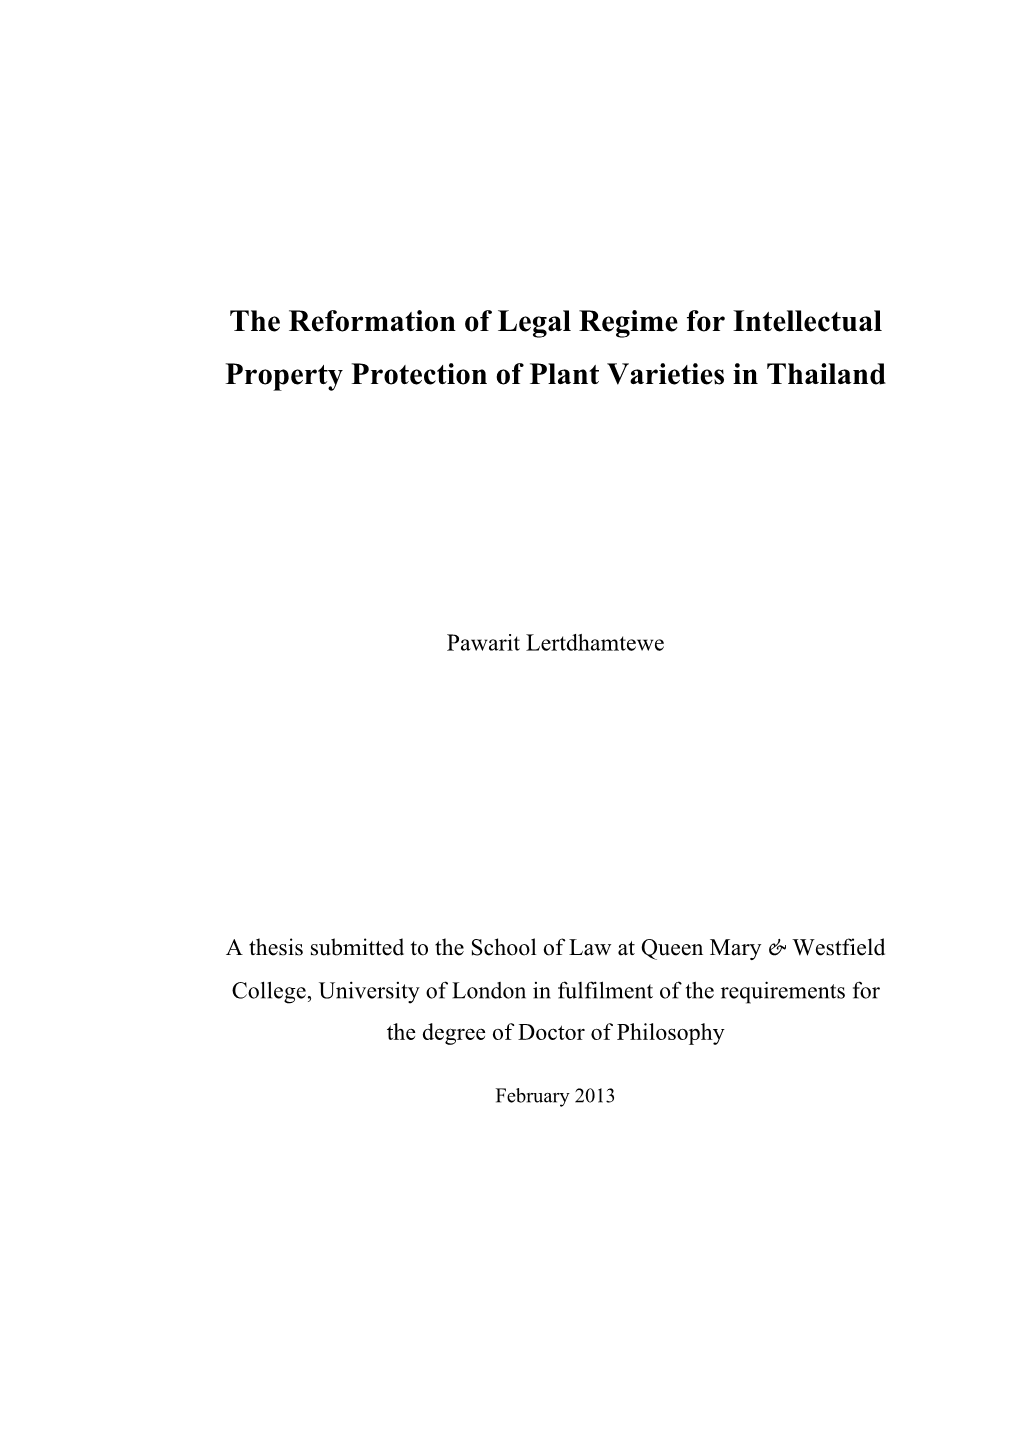 The Reformation of Legal Regime for Intellectual Property Protection of Plant Varieties in Thailand